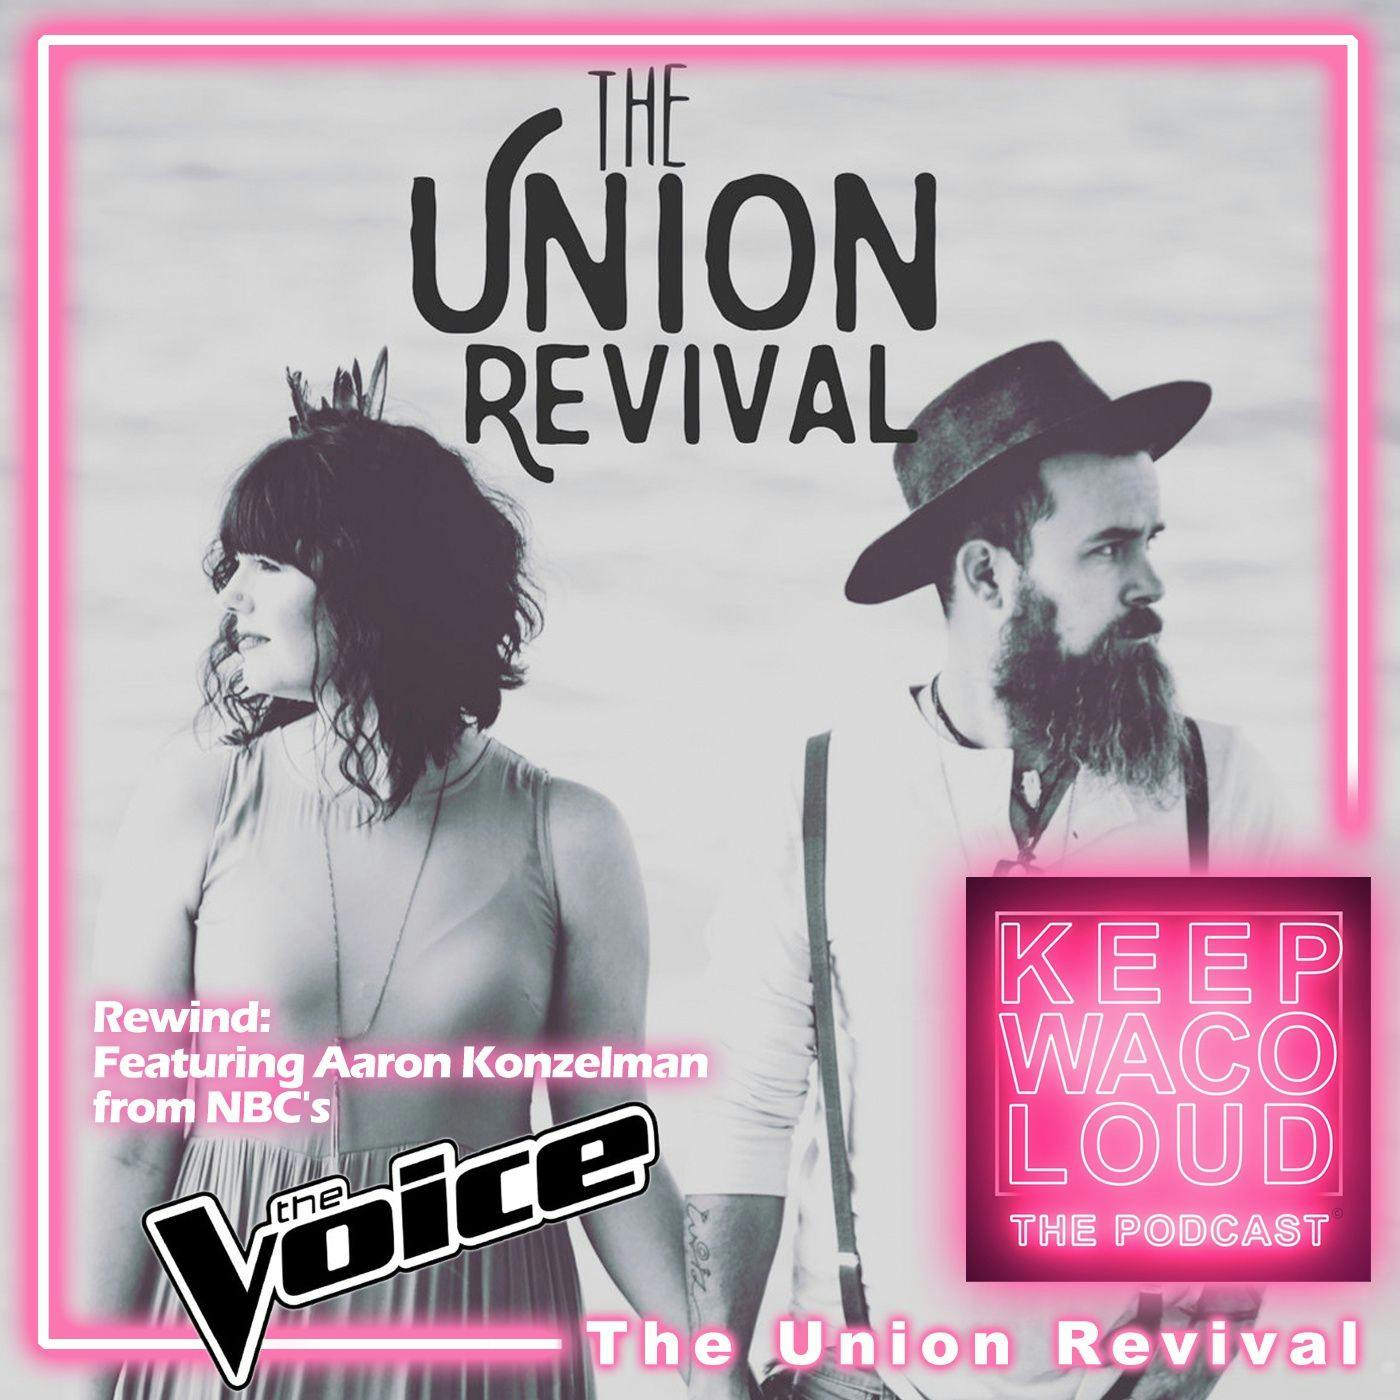 Special Rewind: The Union Revival featuring Aaron Konzelman from NBC's The Voice